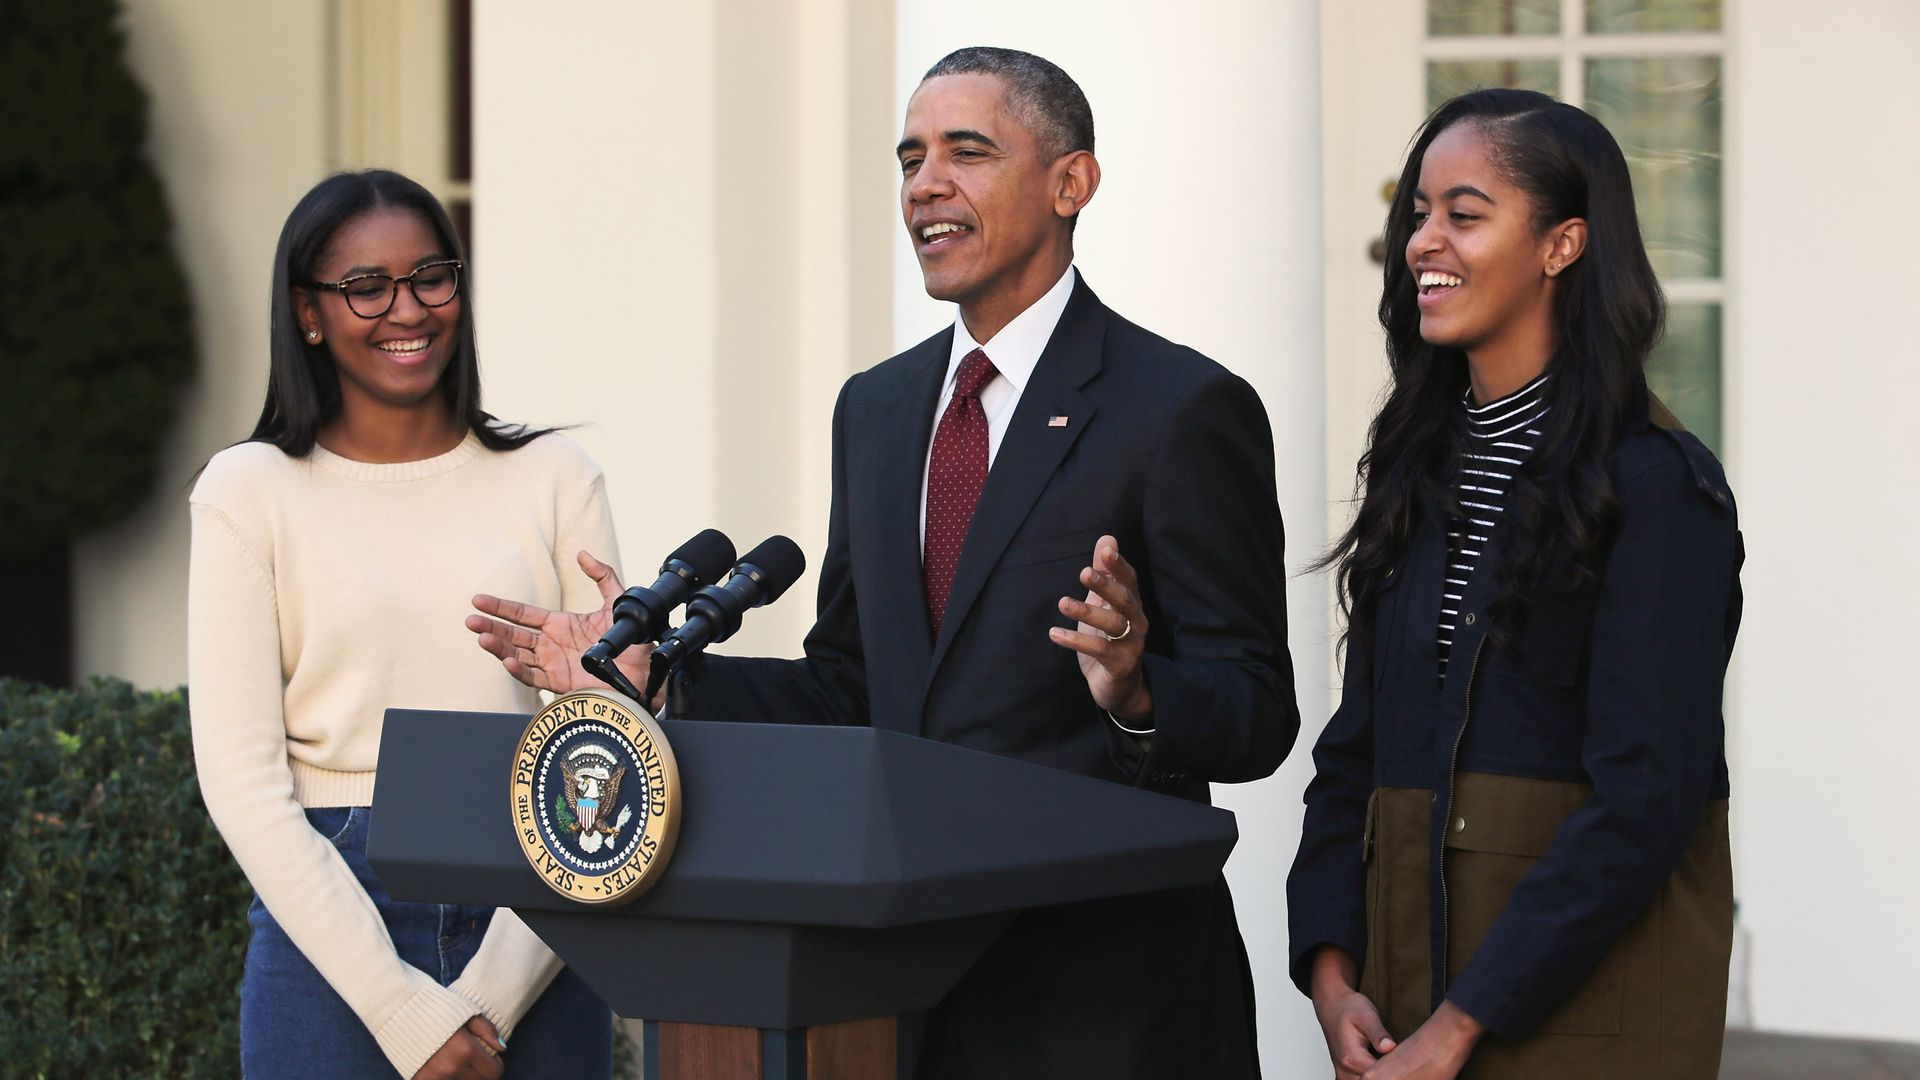 Barack Obama delivers remarks with his daughters Sasha and Malia during the annual turkey pardoning ceremony in the Rose Garden at the White House  November 25, 2015 in Washington, DC